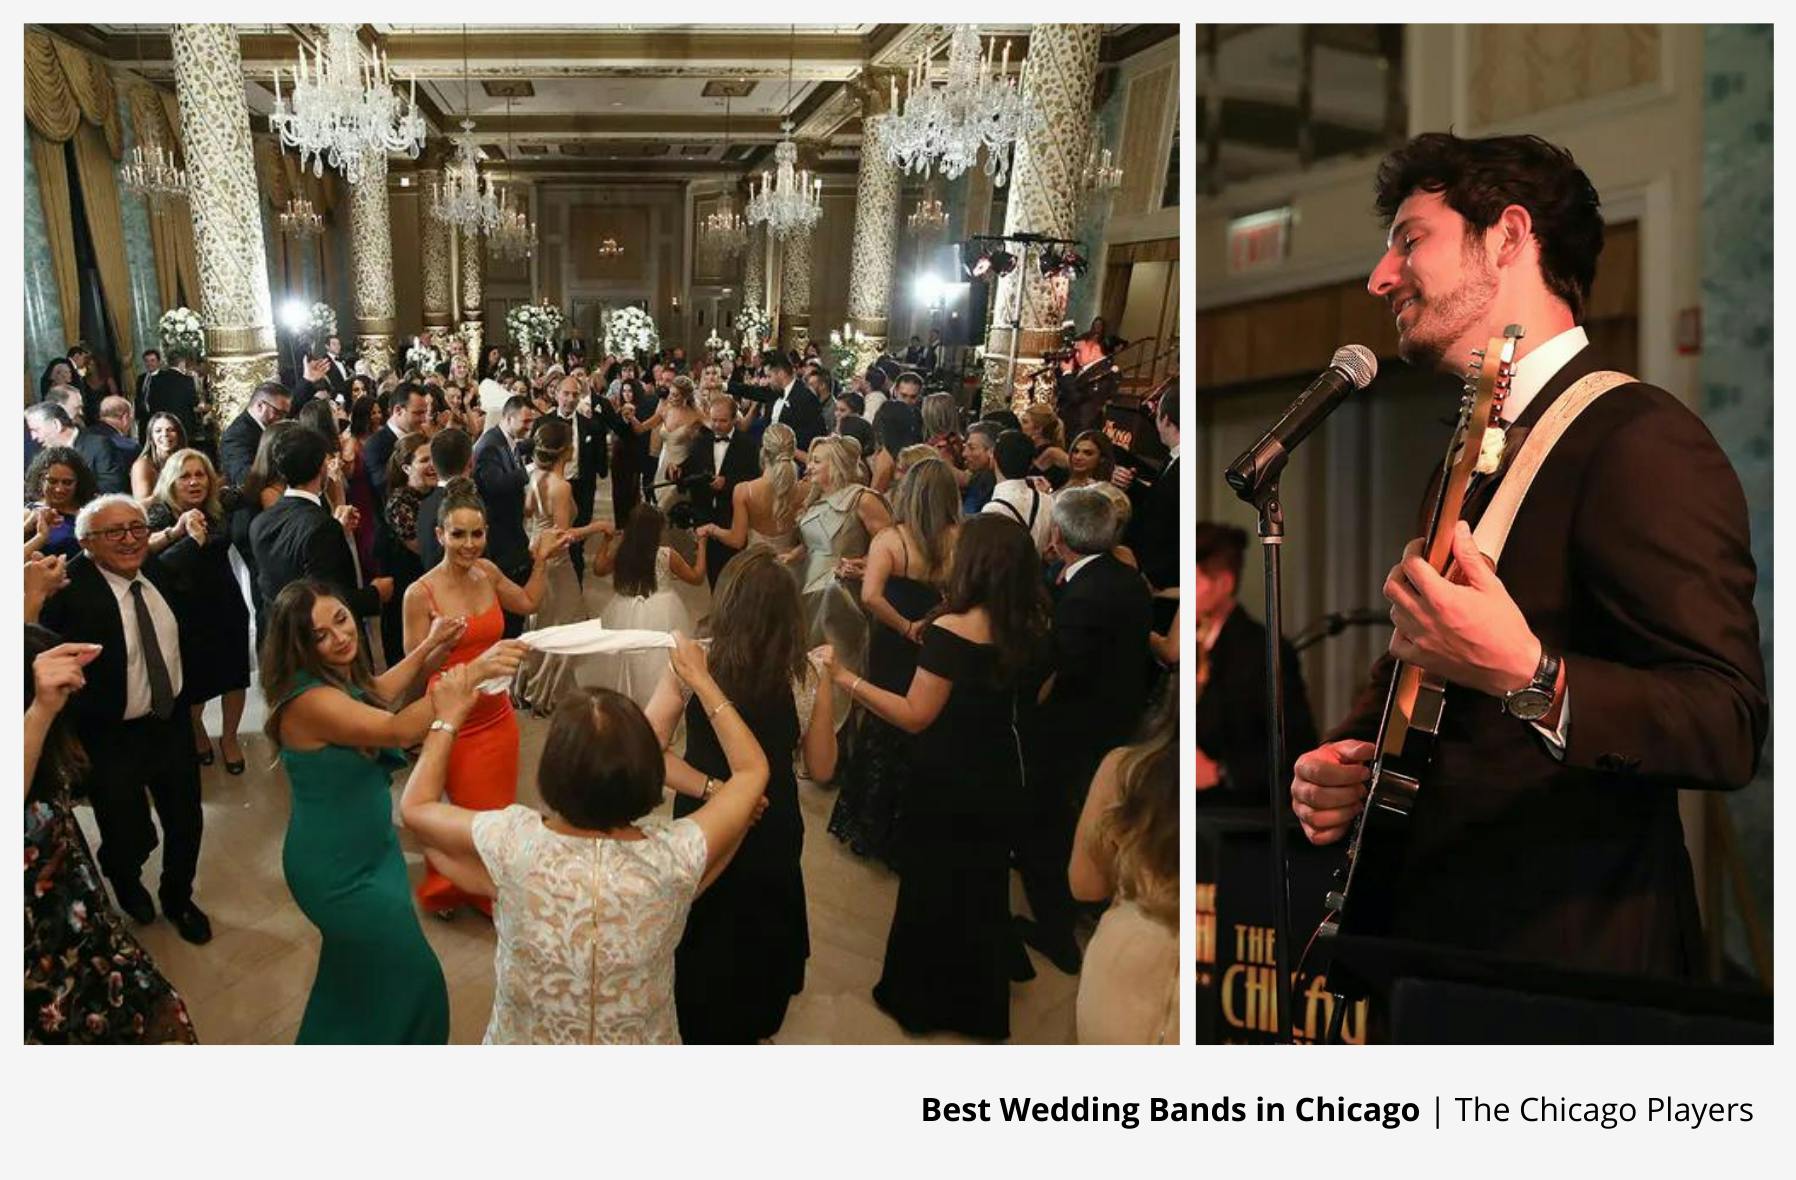 The Chicago Players Performing at a Wedding With The Guests dancing | PartySlate